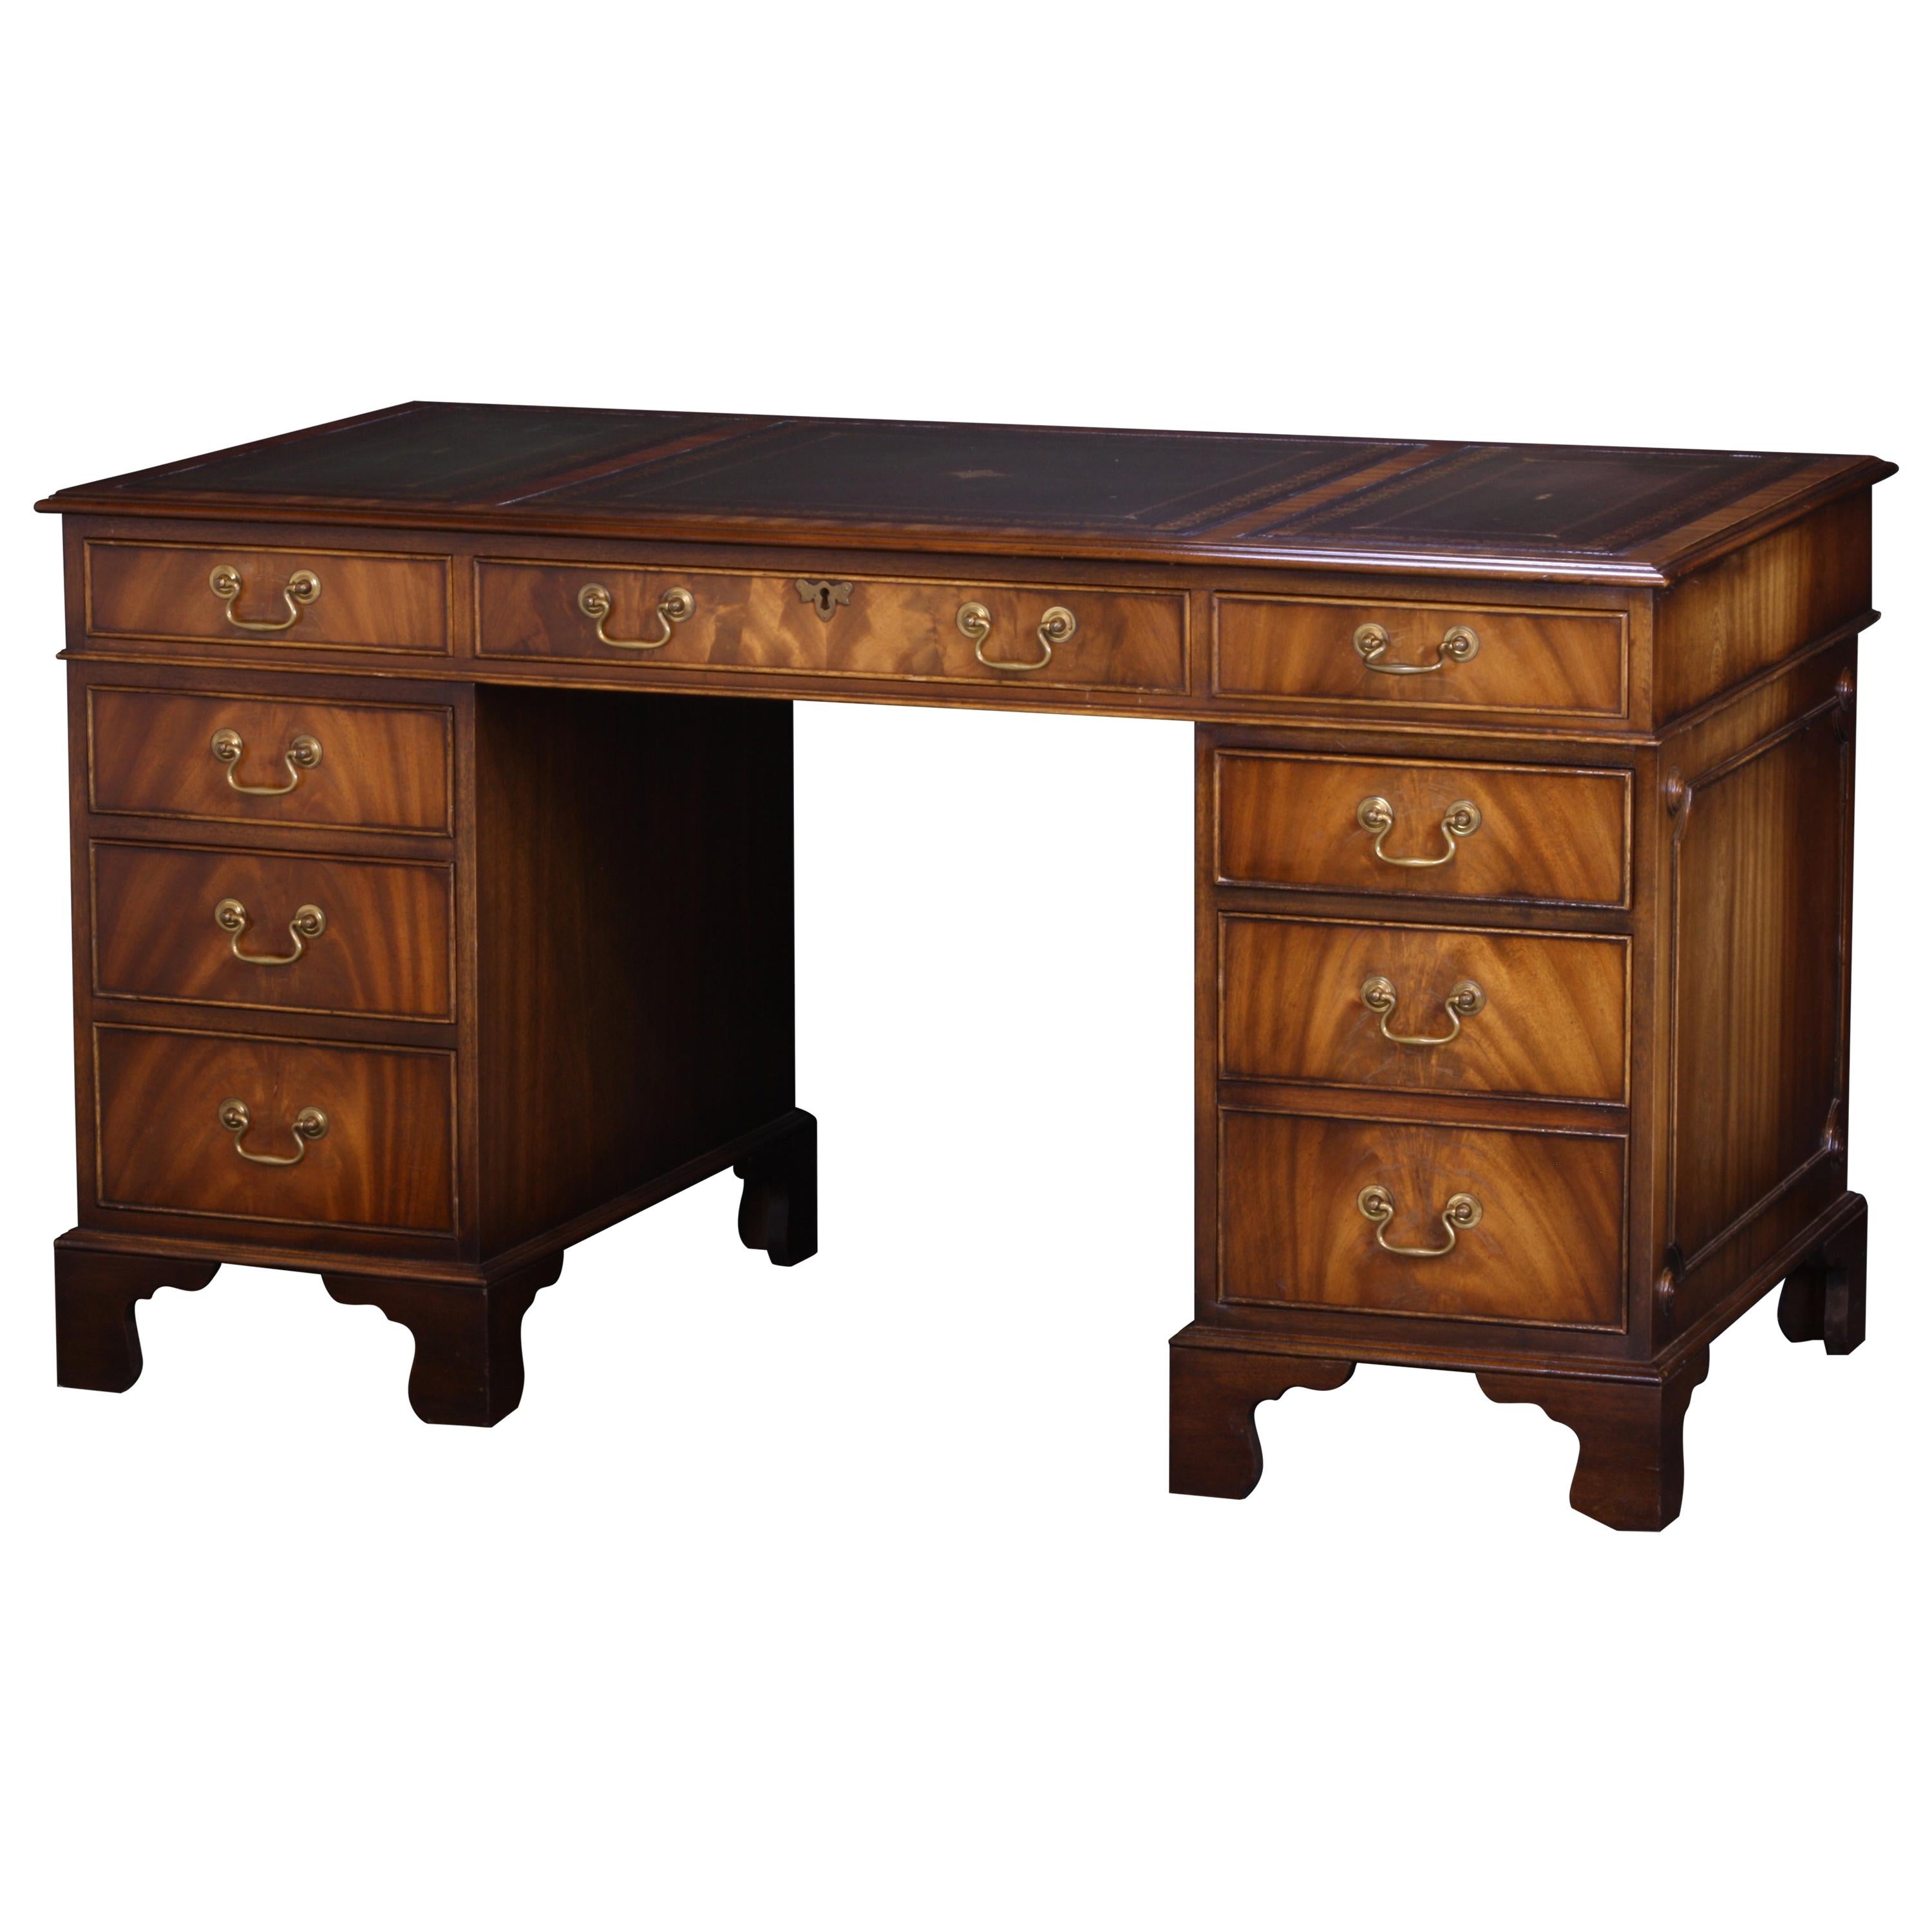 Desk English Double Pedestal in Mahogany with Tooled Green Leather Top